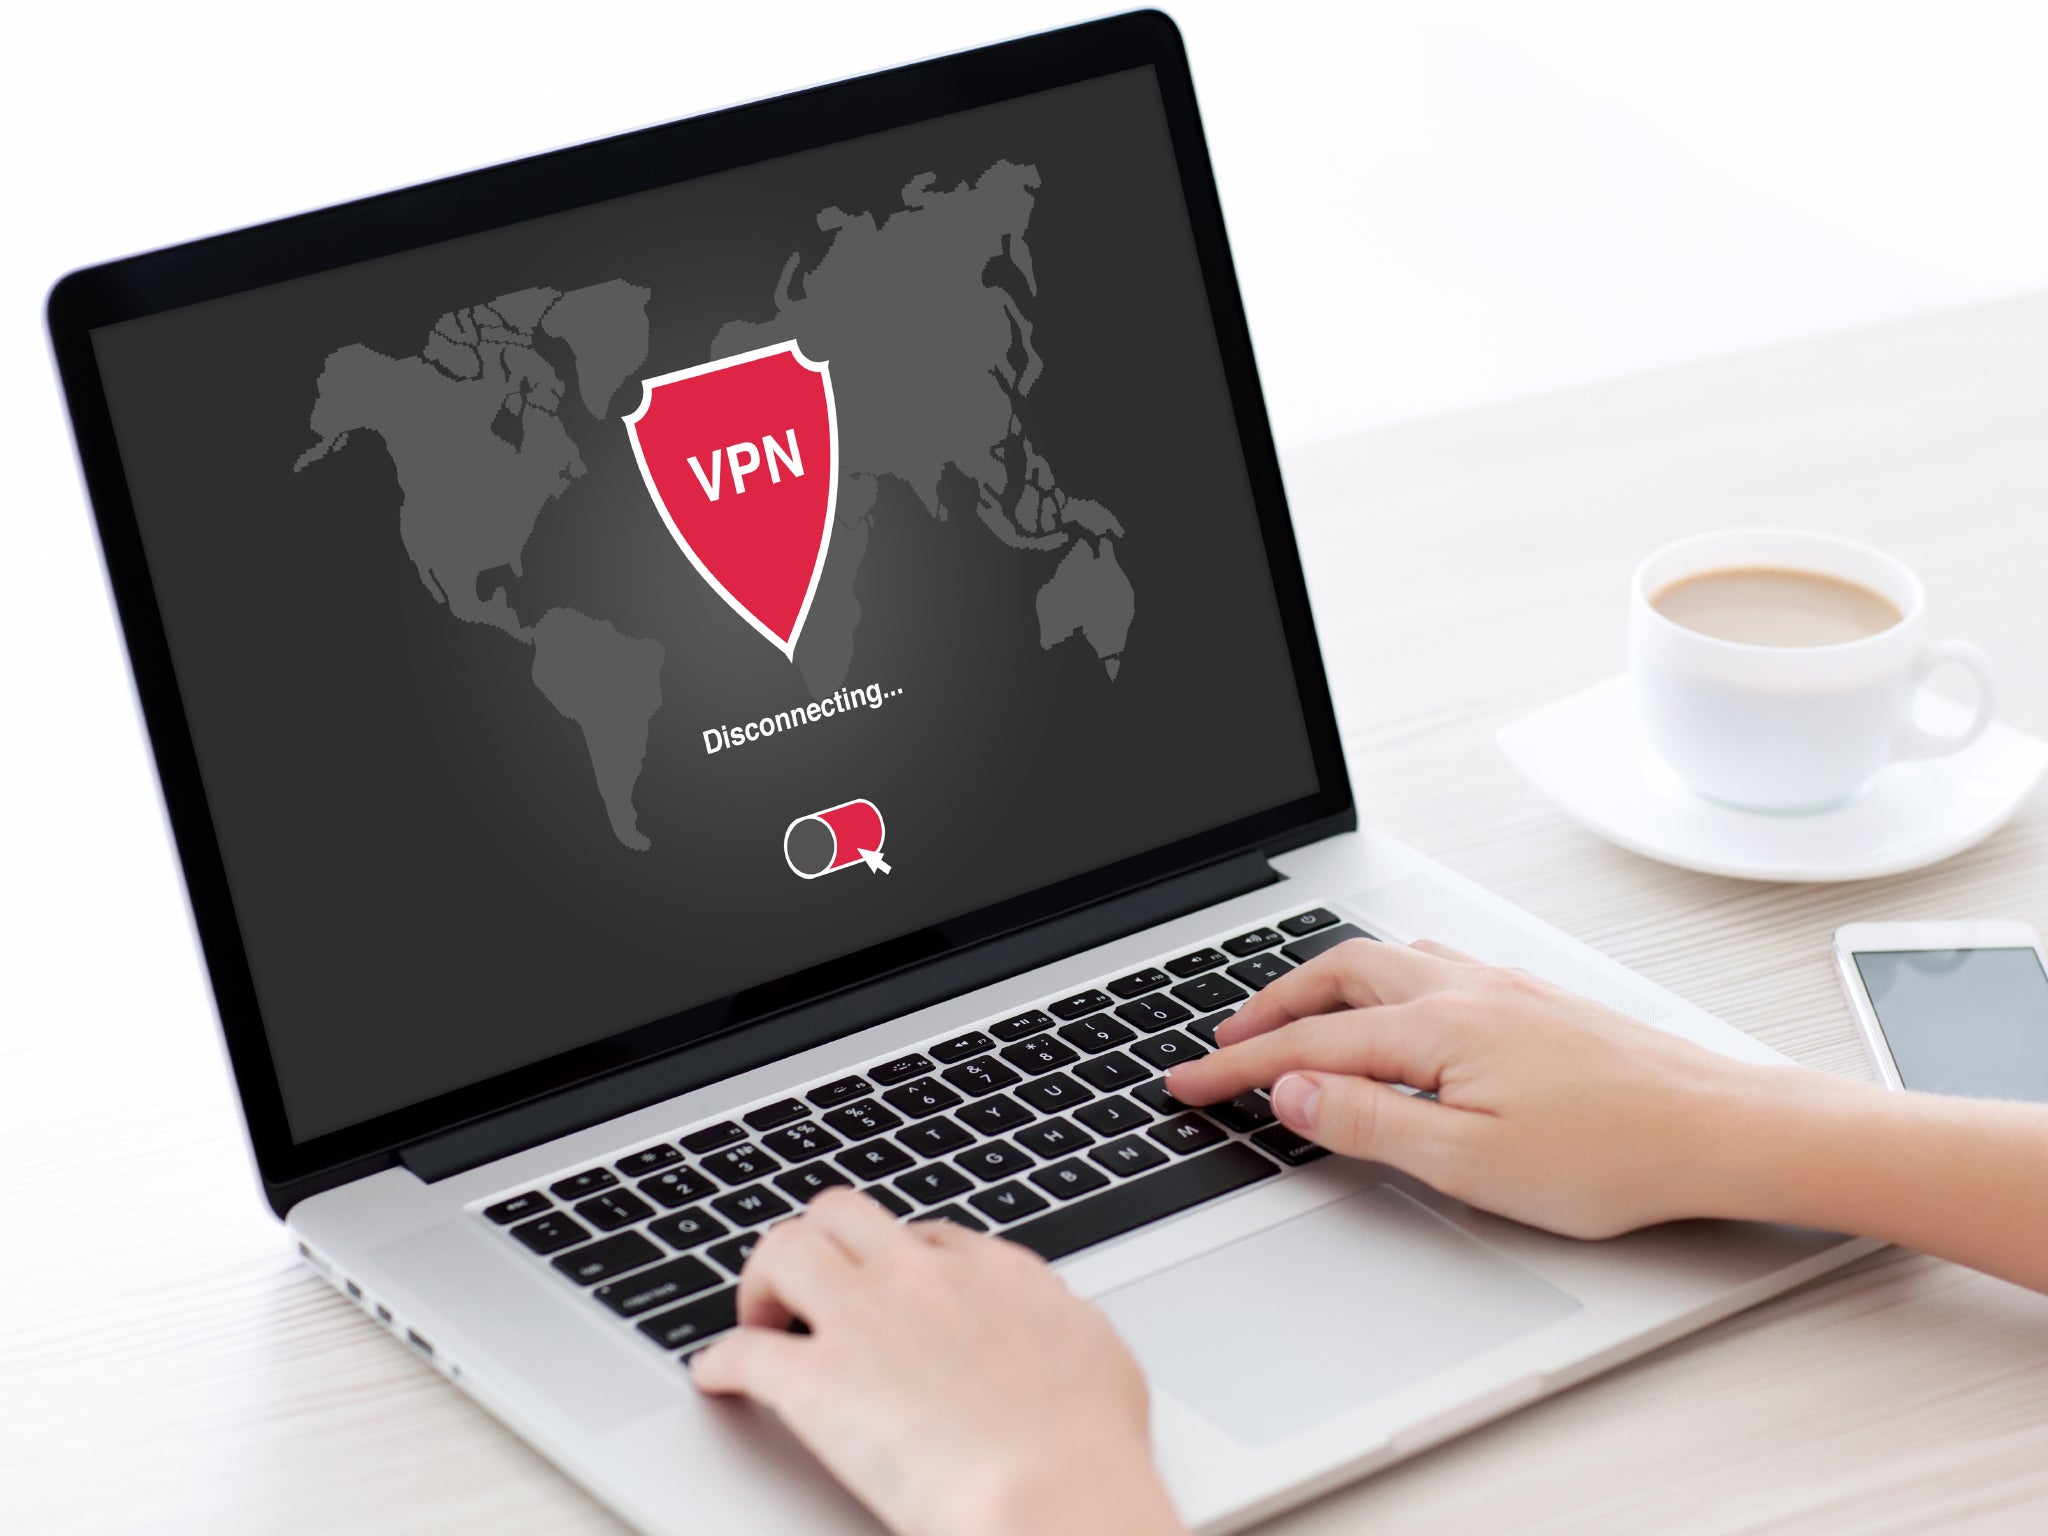 8 best VPN services for browsing securely in 2022